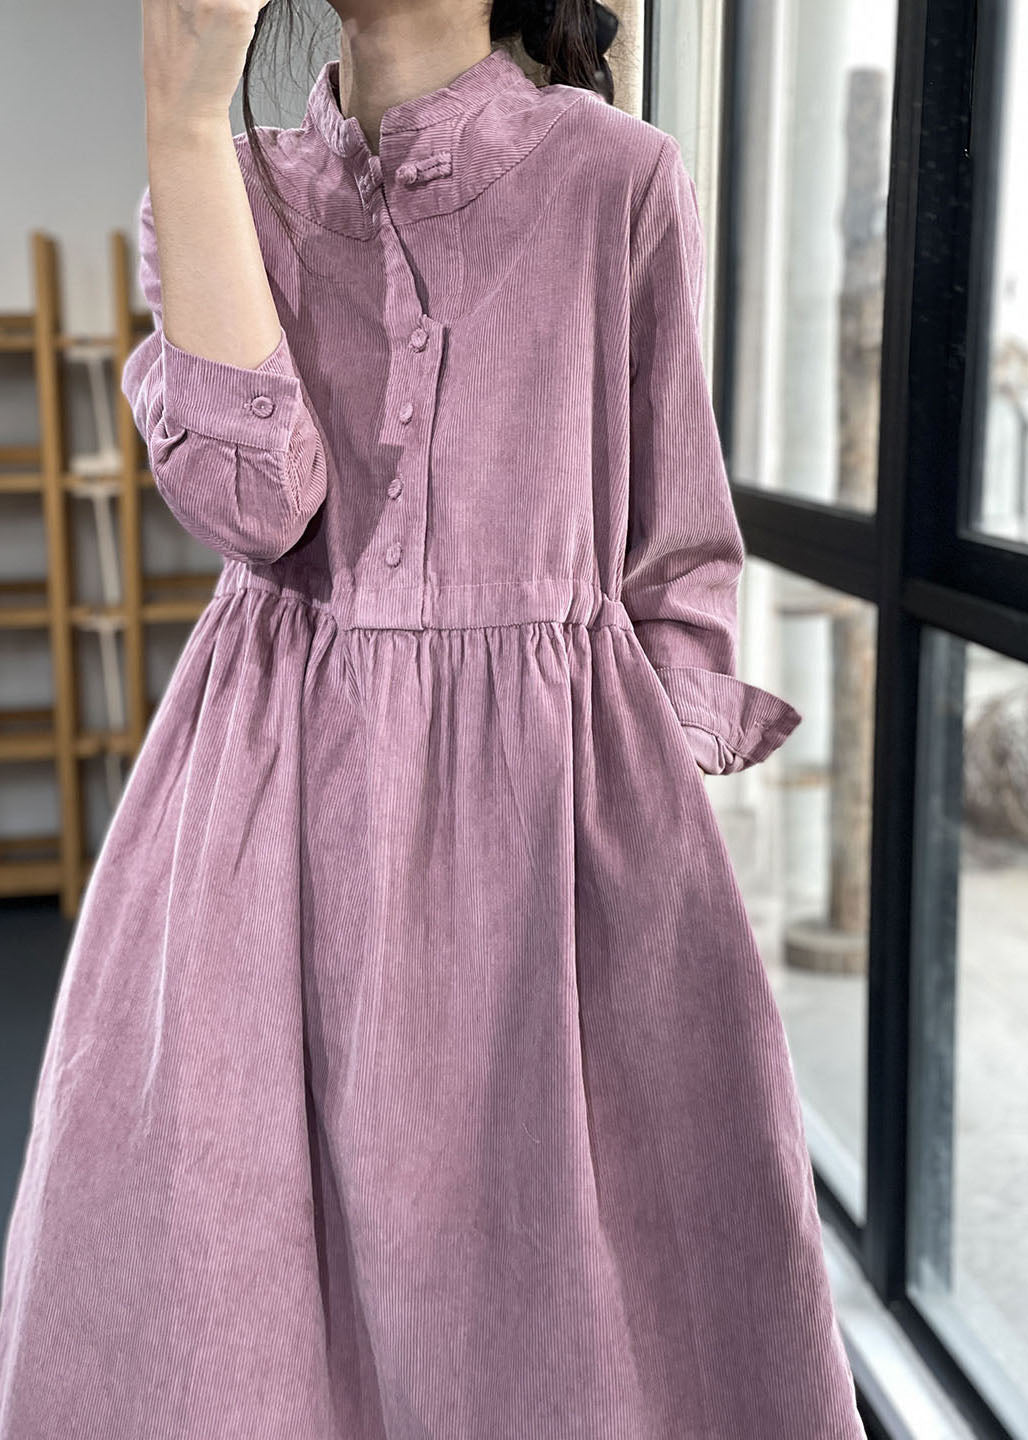 Red Button Pockets Corduroy Dresses Winter